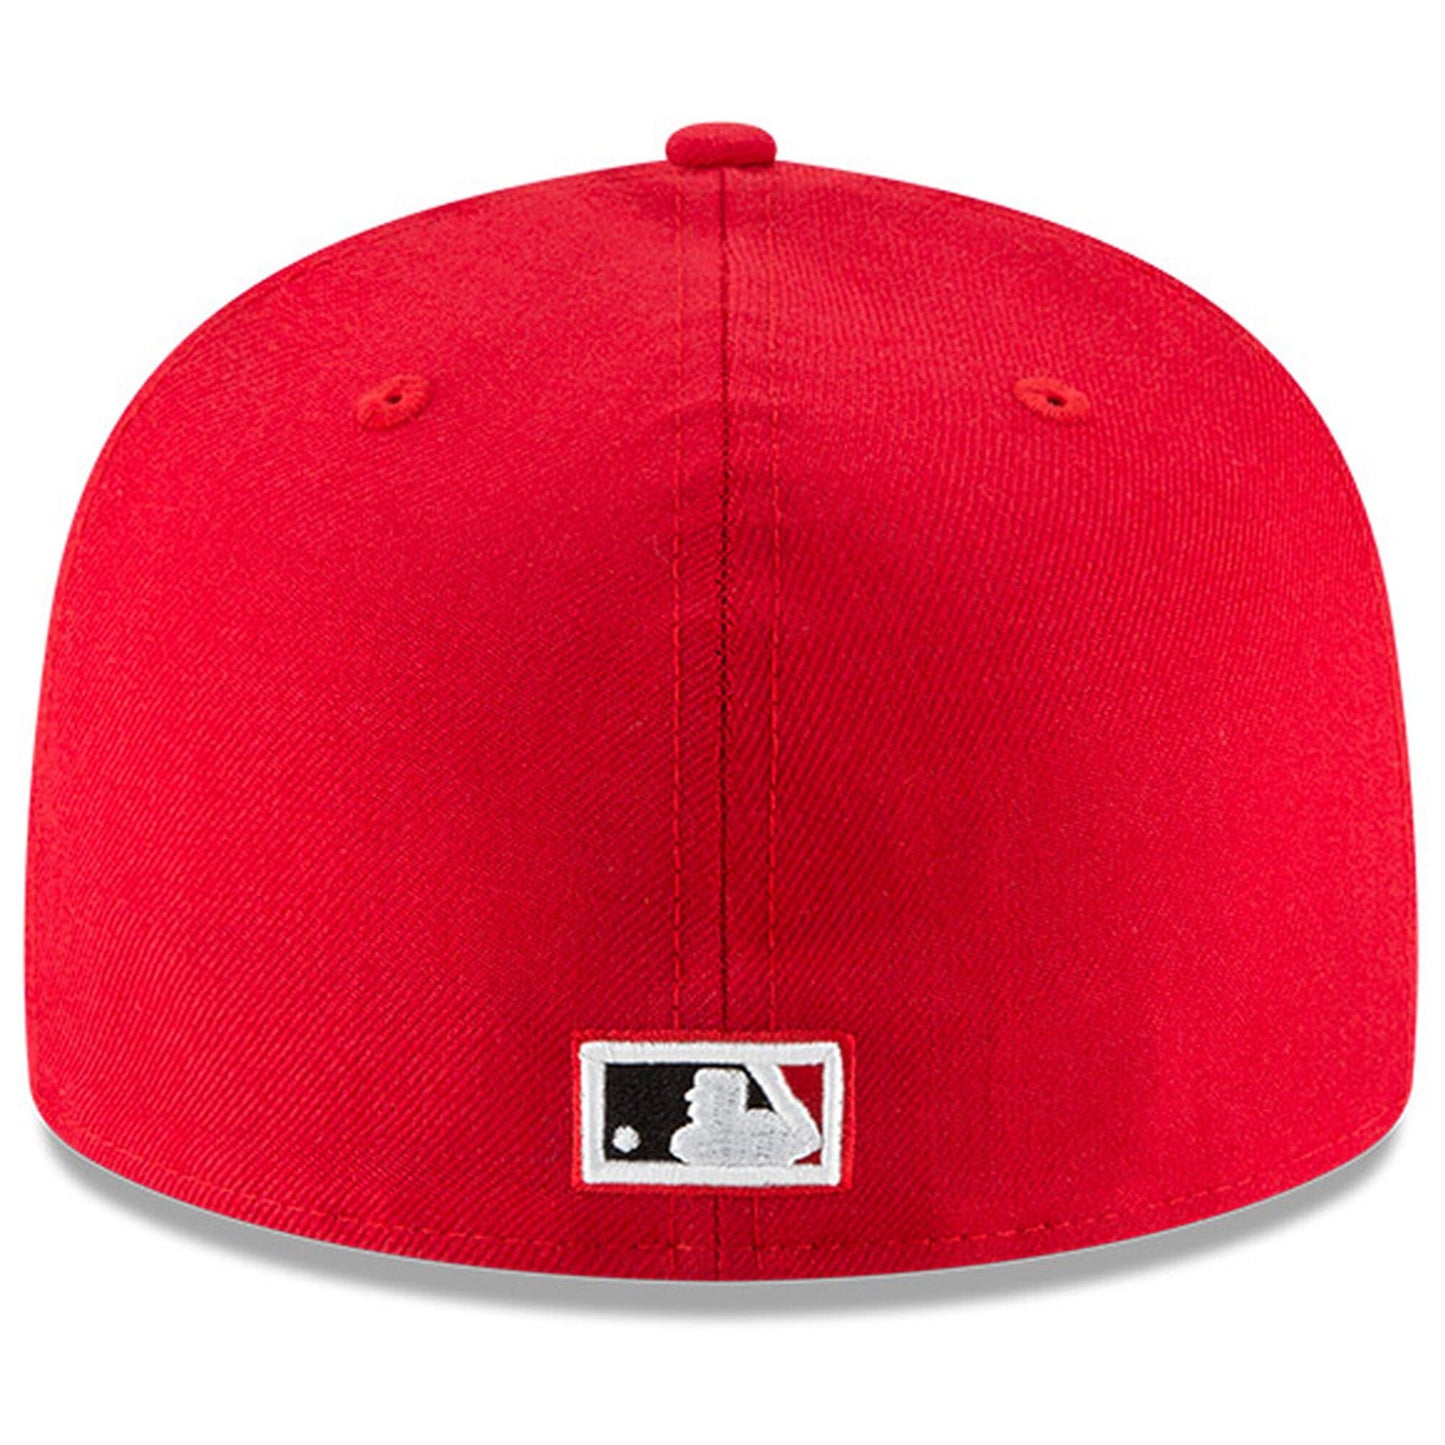 Men's Cincinnati Reds New Era Red Cooperstown Collection 1869 59FIFTY Fitted Hat